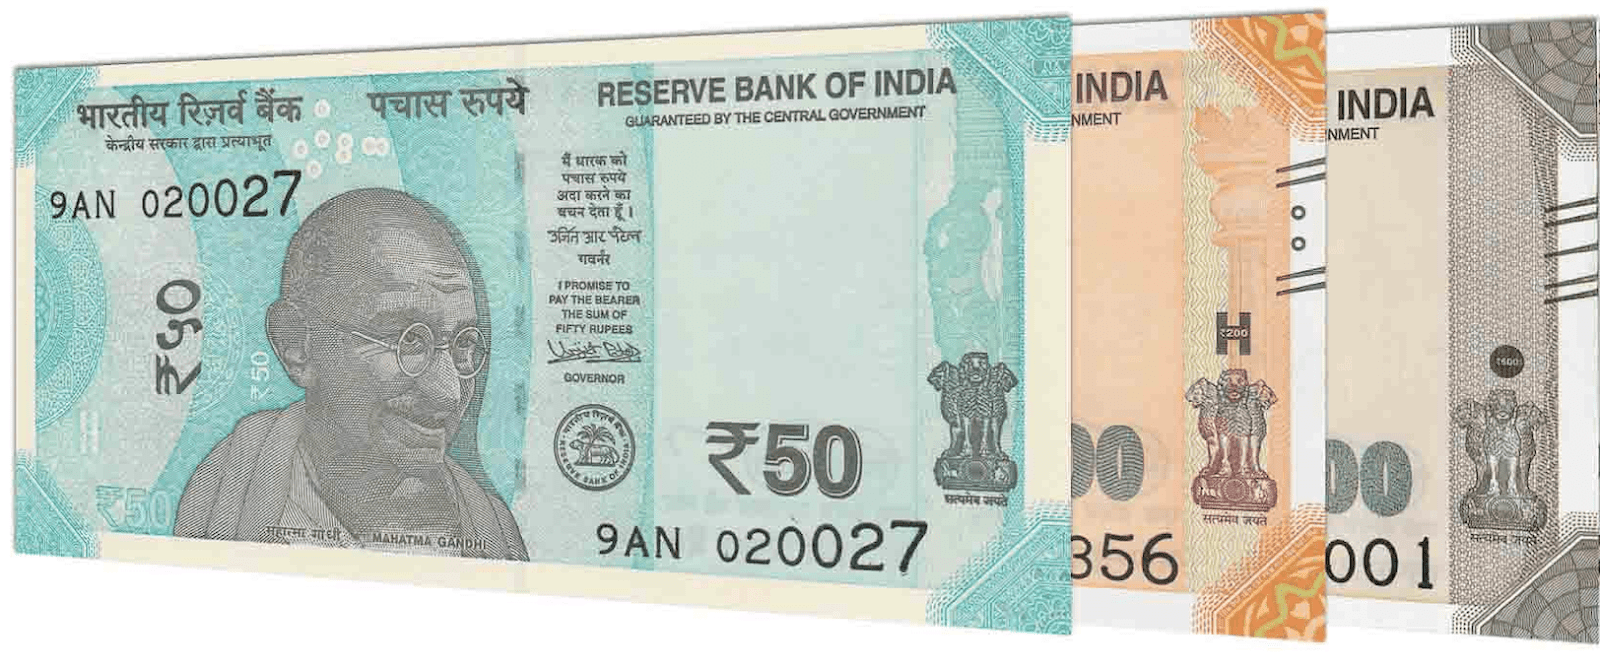 Indian rupees banknote series